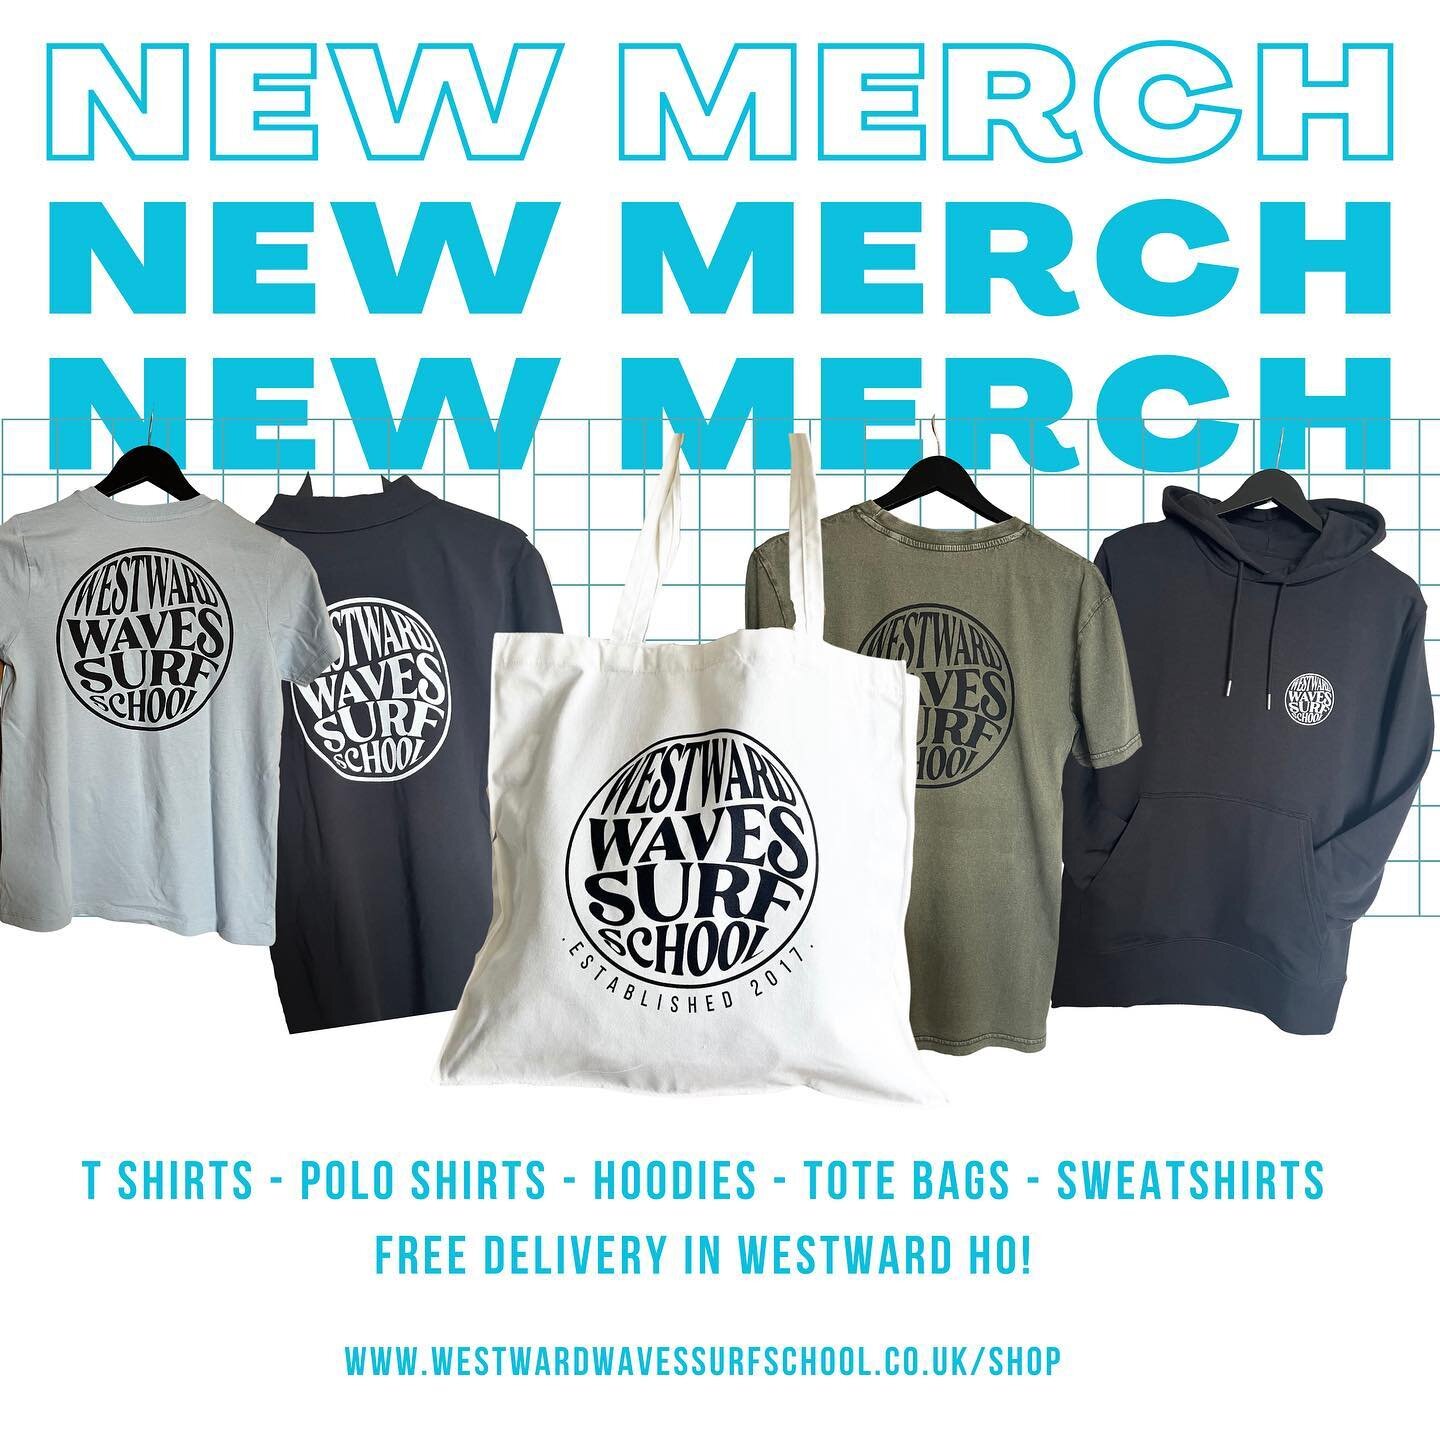 After so many of you asked for it last summer, we&rsquo;ve stocked up on our very own Westward Waves merch! 
.
We teamed up with the amazing folk at @broadsidescreenprinting in Exeter and have a selection of goodies available. All available online or